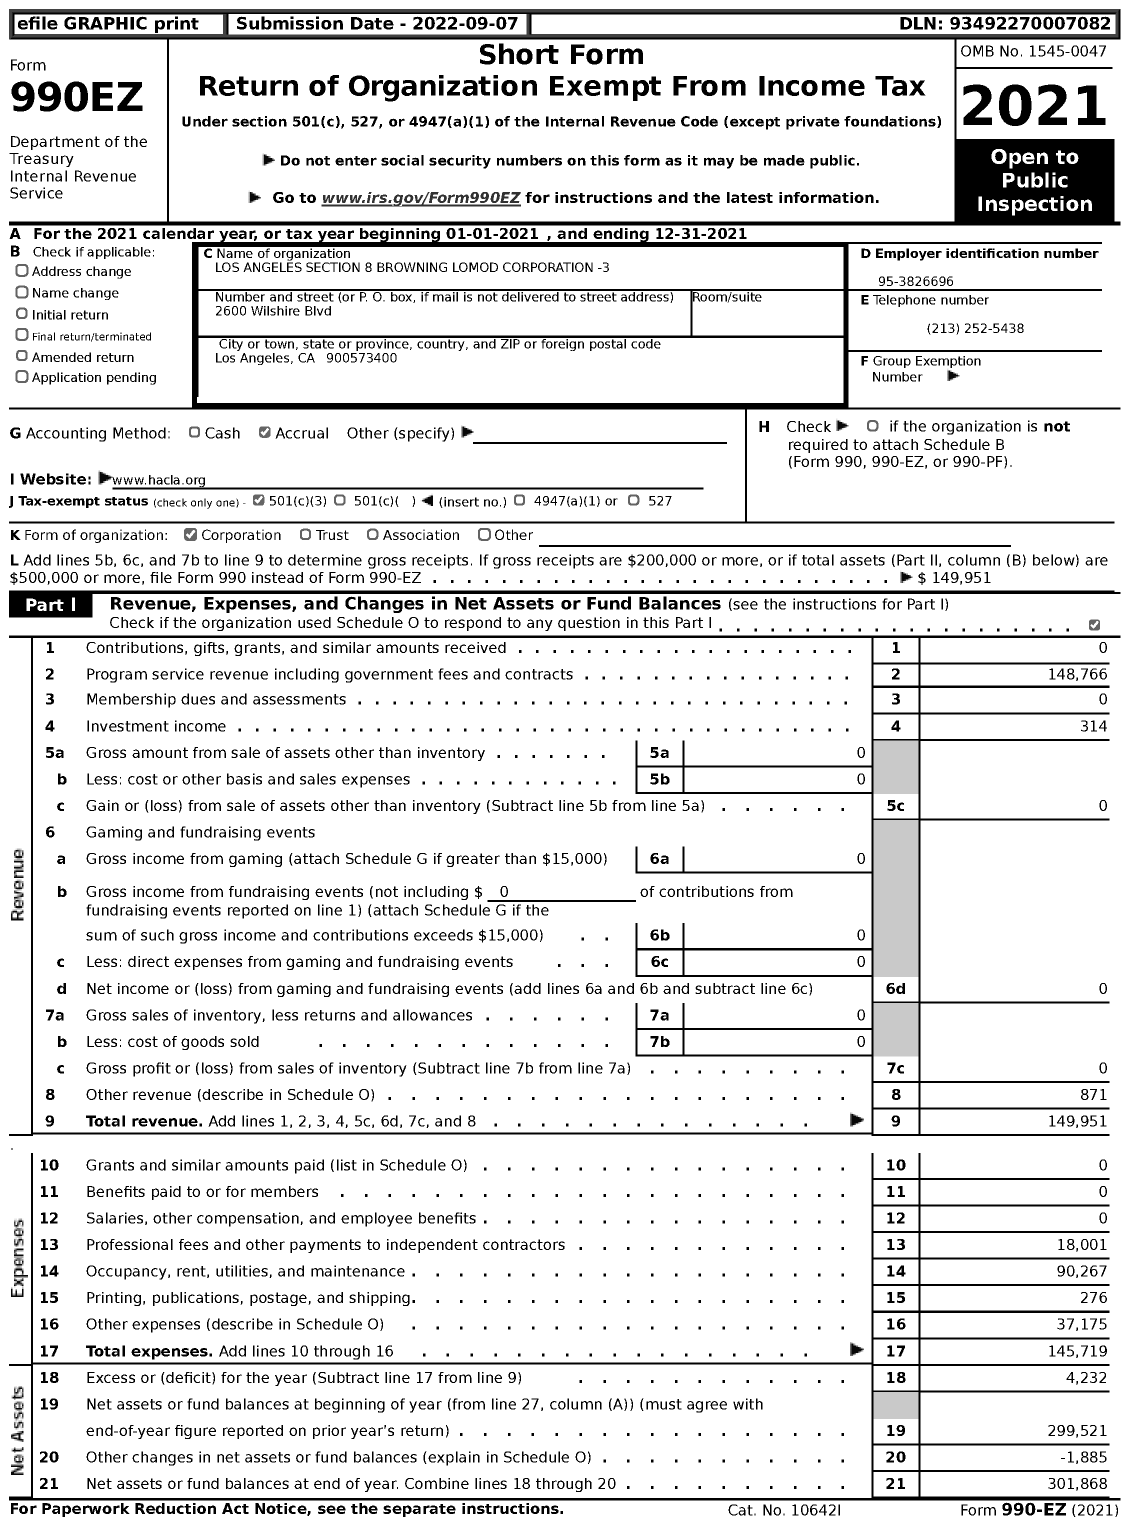 Image of first page of 2021 Form 990EZ for Los Angeles Section 8 Browning Lomod Corporation -3